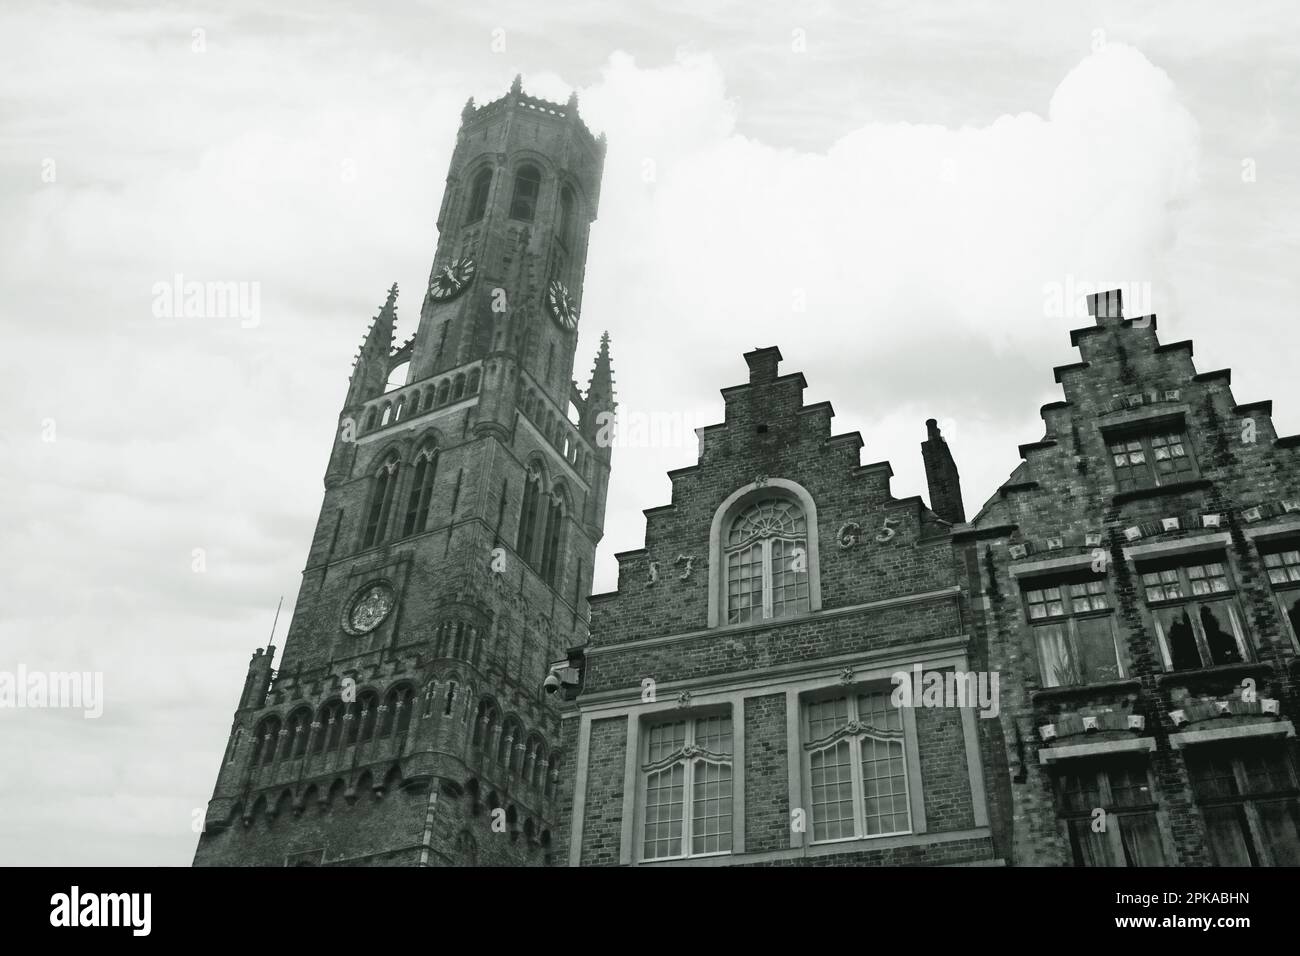 The Belfort, or Belfry Tower ascends into February mist, flanked by venerable medieval buildings in the Grote Markt, Brugge, Belgium Stock Photo